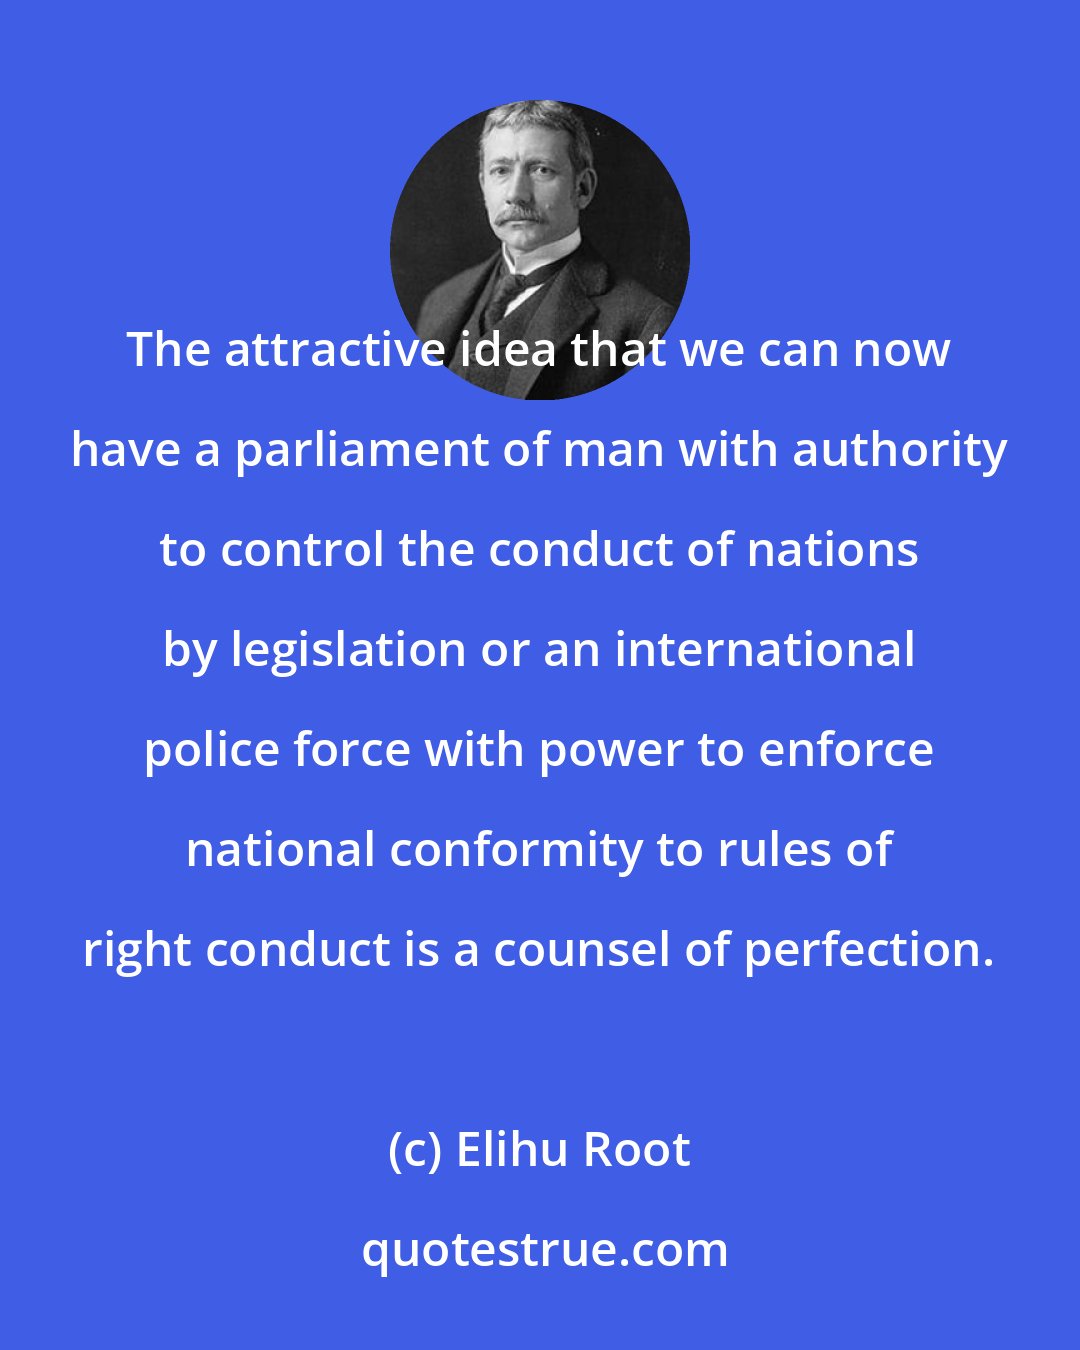 Elihu Root: The attractive idea that we can now have a parliament of man with authority to control the conduct of nations by legislation or an international police force with power to enforce national conformity to rules of right conduct is a counsel of perfection.